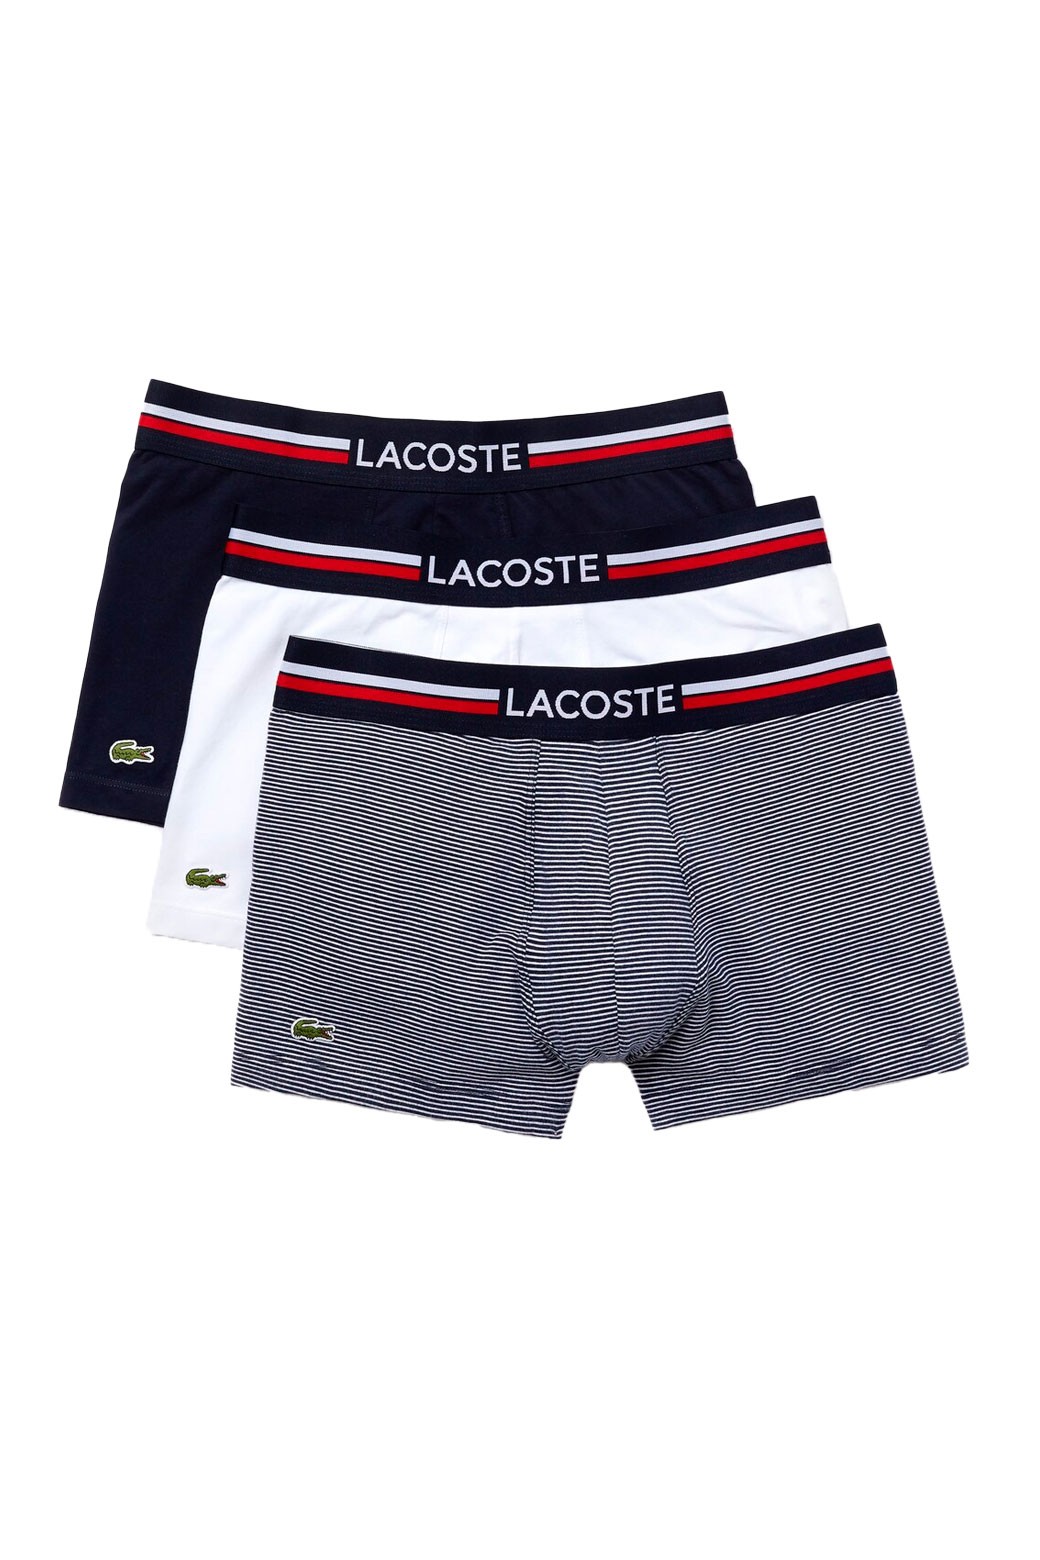 https://neverlandstreetwear.com/12566-foto_producto/boxers-lacoste-courts-pack-3-azul-y-blanco.jpg